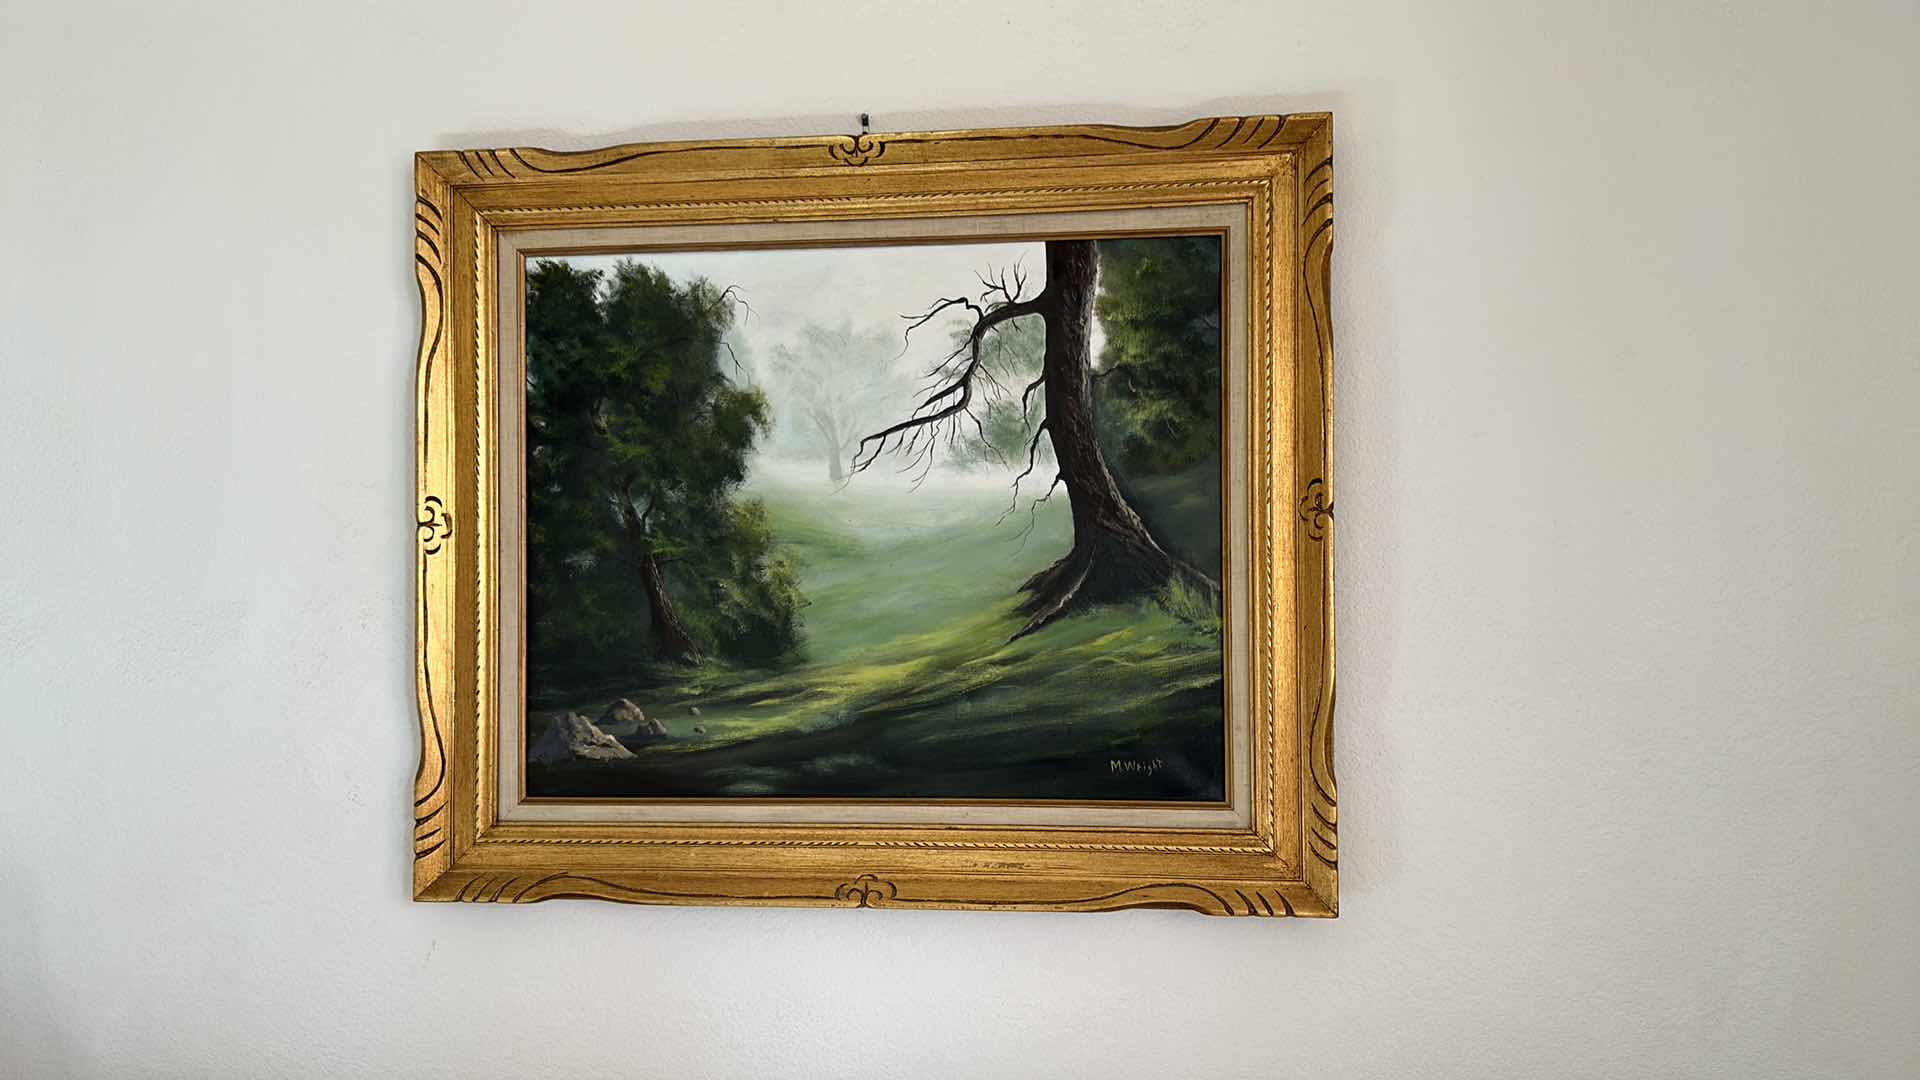 Photo 1 of FRAMED PAINTING OF TREES IN THE COUNTRY - SIGNED BY “M.WRIGHT” 35.5 x 30